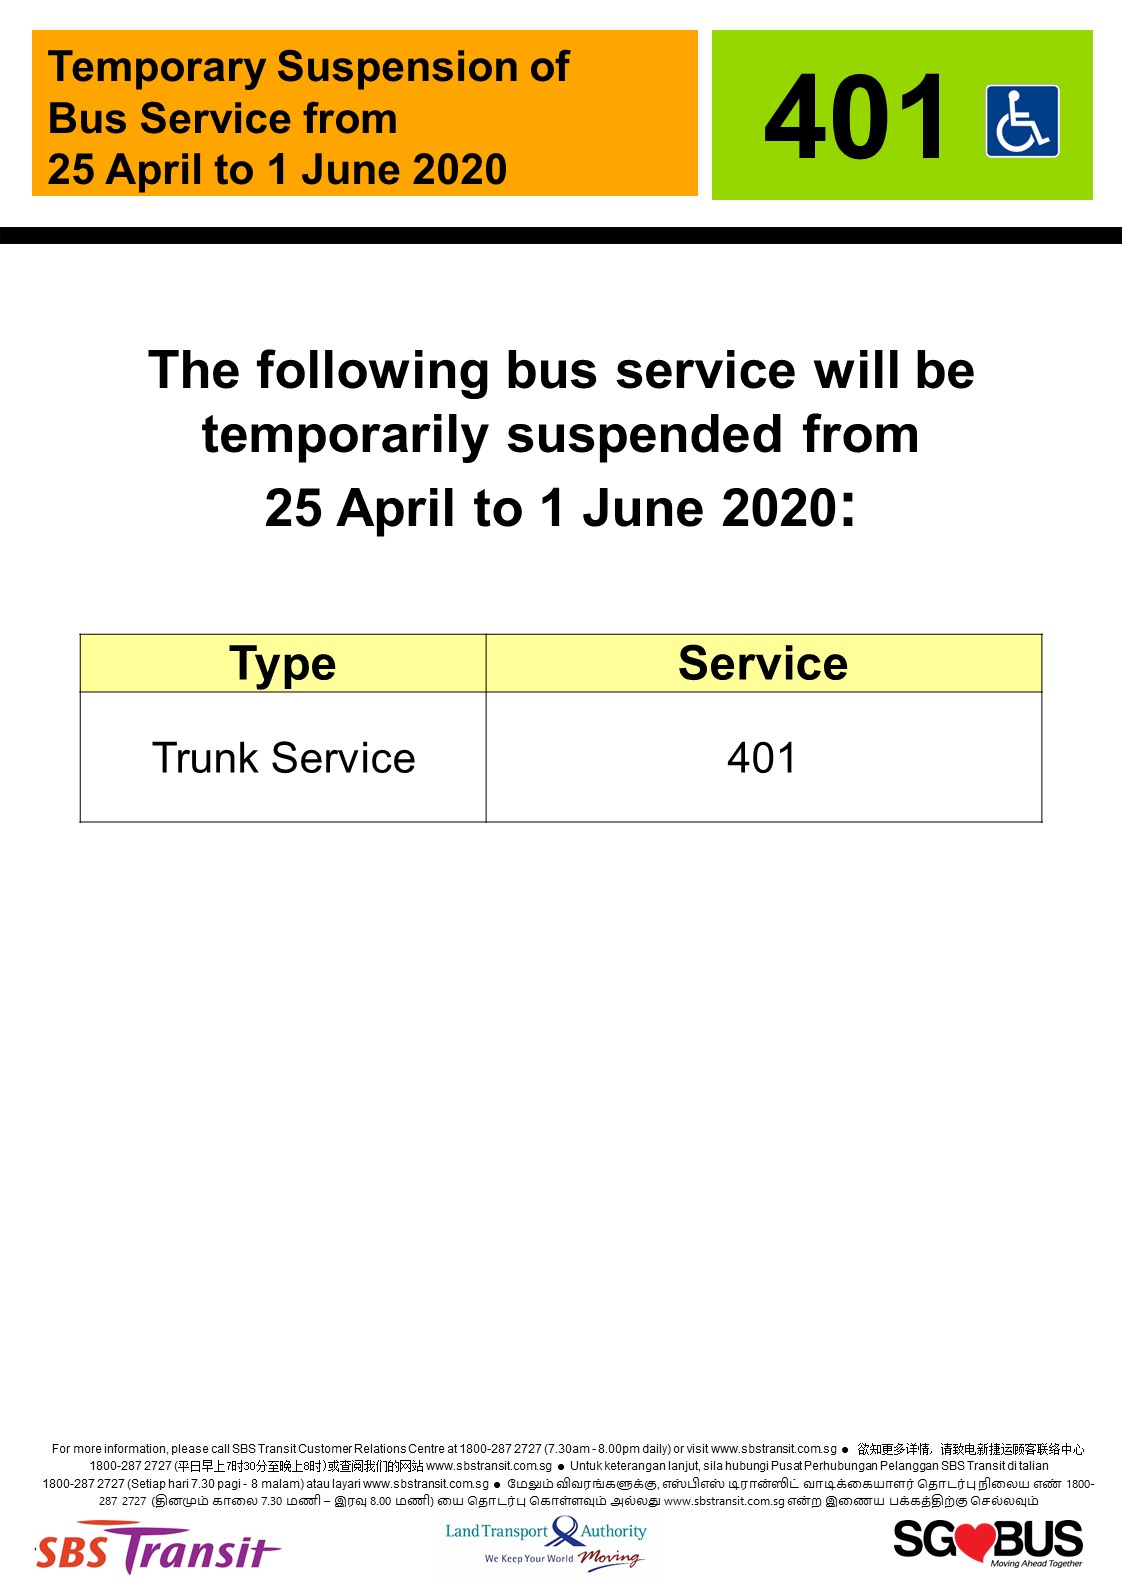 Official announcement from SBS Transit on temporary suspension of bus service 401 during COVID-19 Circuit Breaker measures from 25 April 2020 to 1 June 2020.